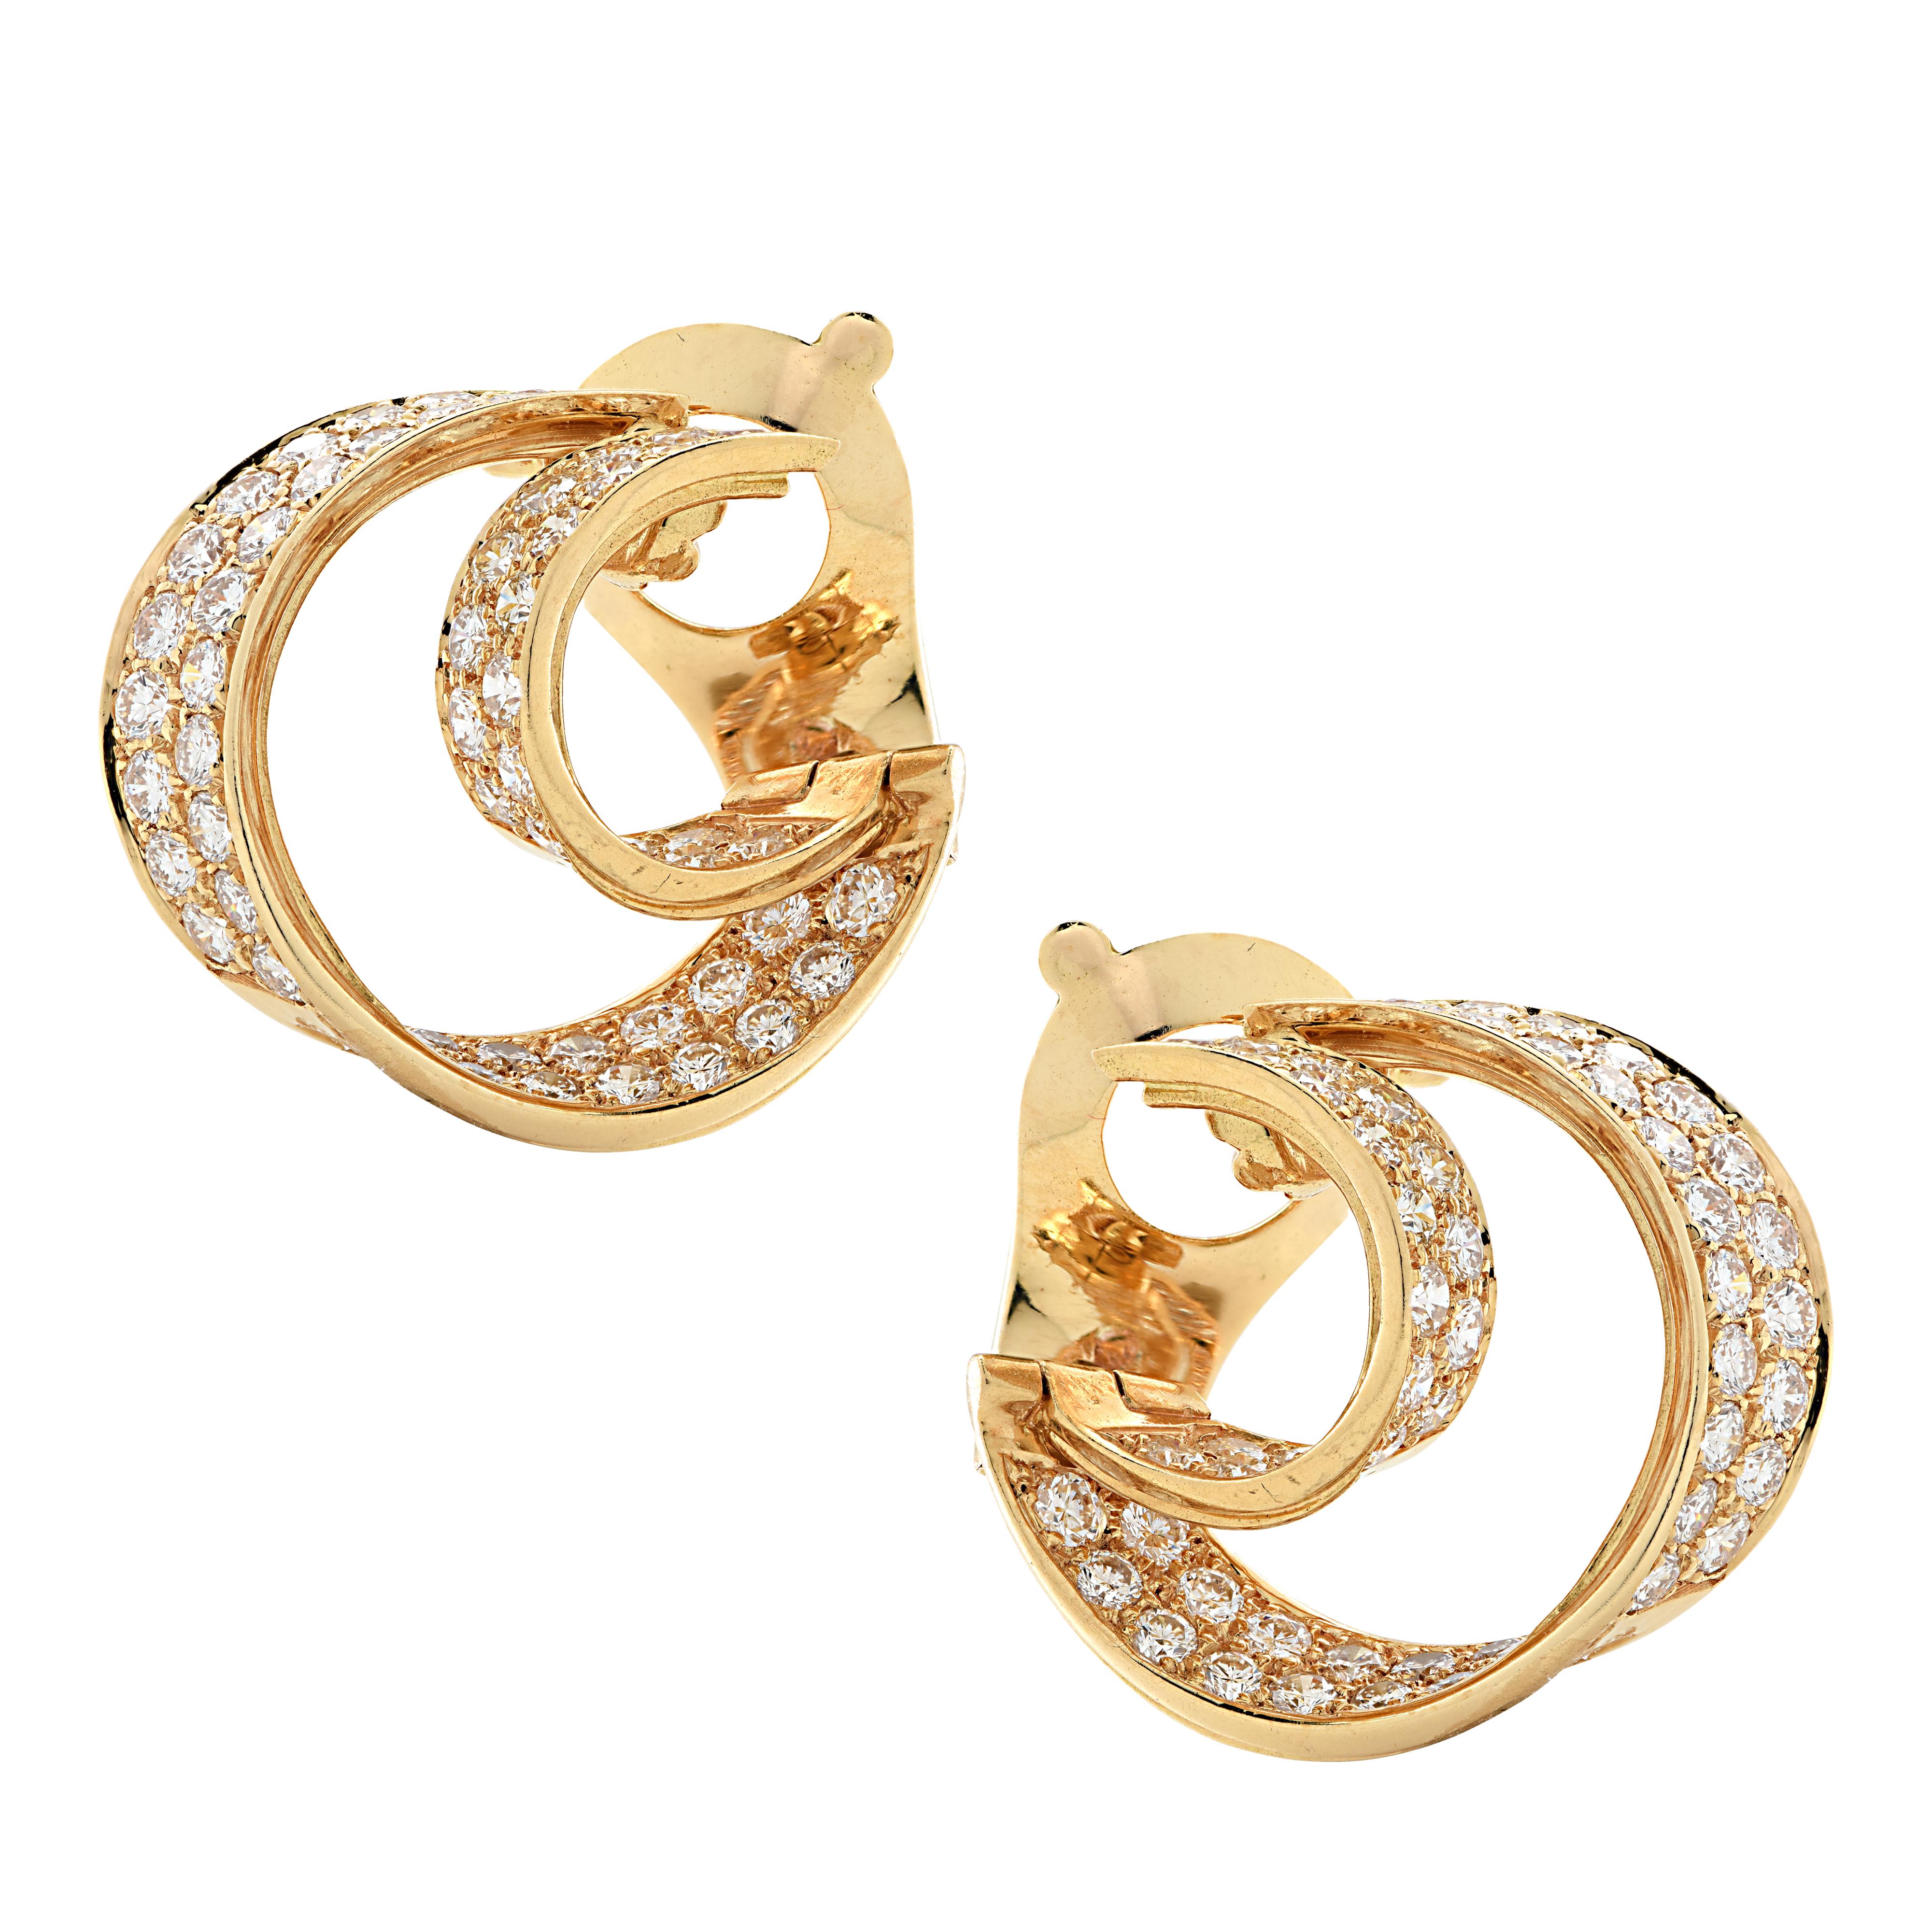 From the legendary House of Van Cleef & Arpels, these exquisite double hoop clip-on earrings, finely handmade in 18 Karat Yellow Gold, showcase 114 round brilliant cut diamonds weighing approximately 5.70 carats total, D-F color, VVS-VS clarity.